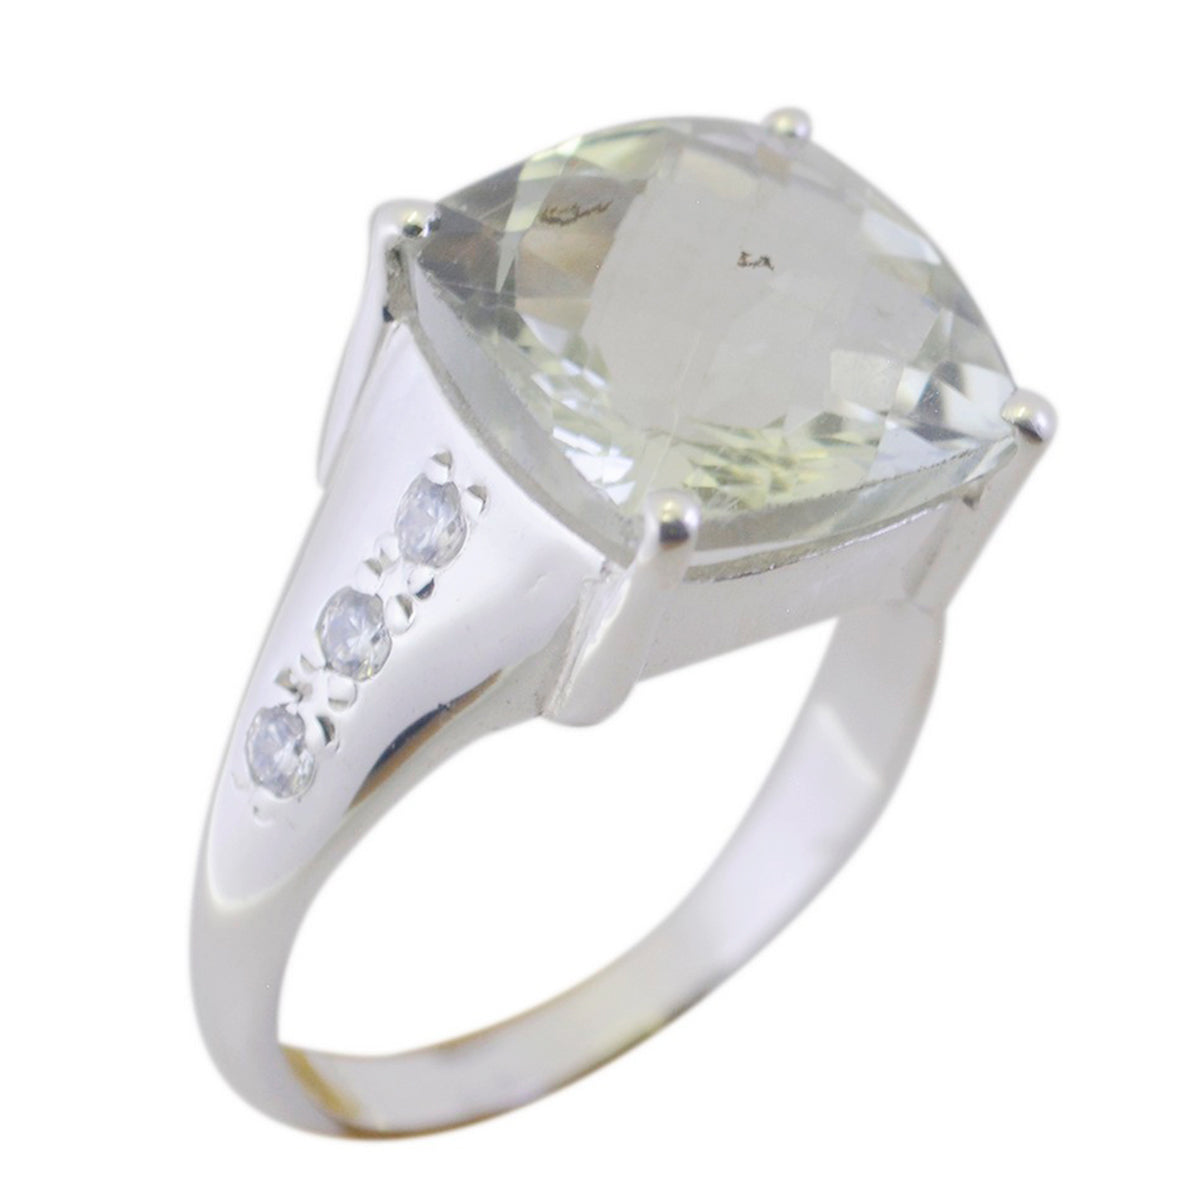 Bonnie Gemstones Green Amethyst Silver Rings Indian Jewelry Stores